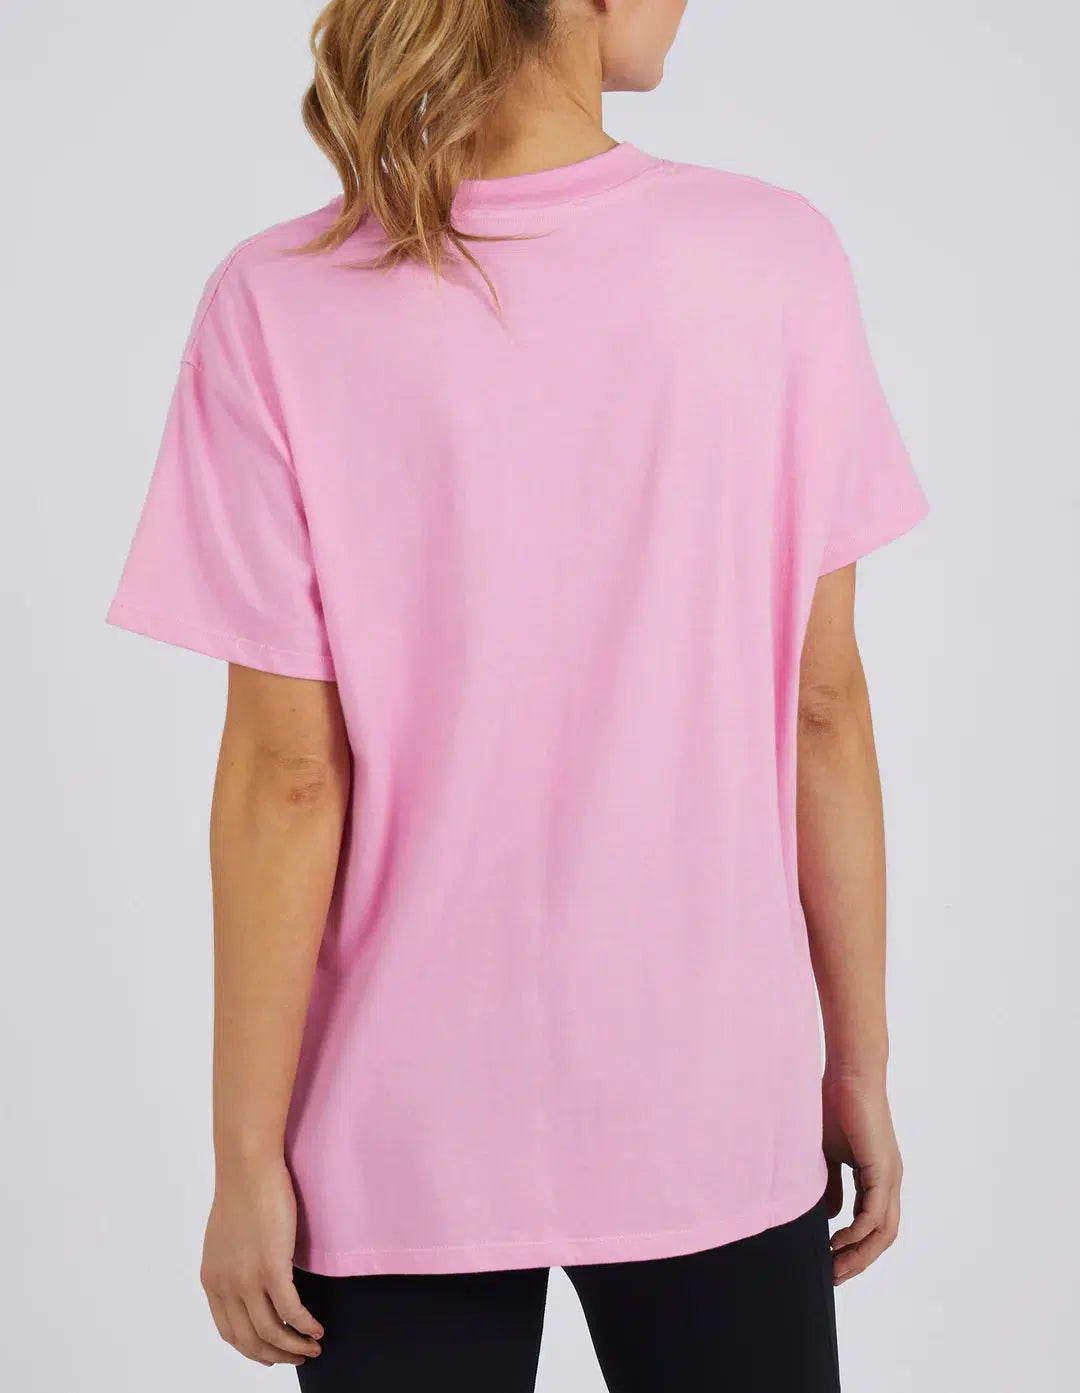 FW Embroidery Tee - Pink-Elm Lifestyle-Lima & Co